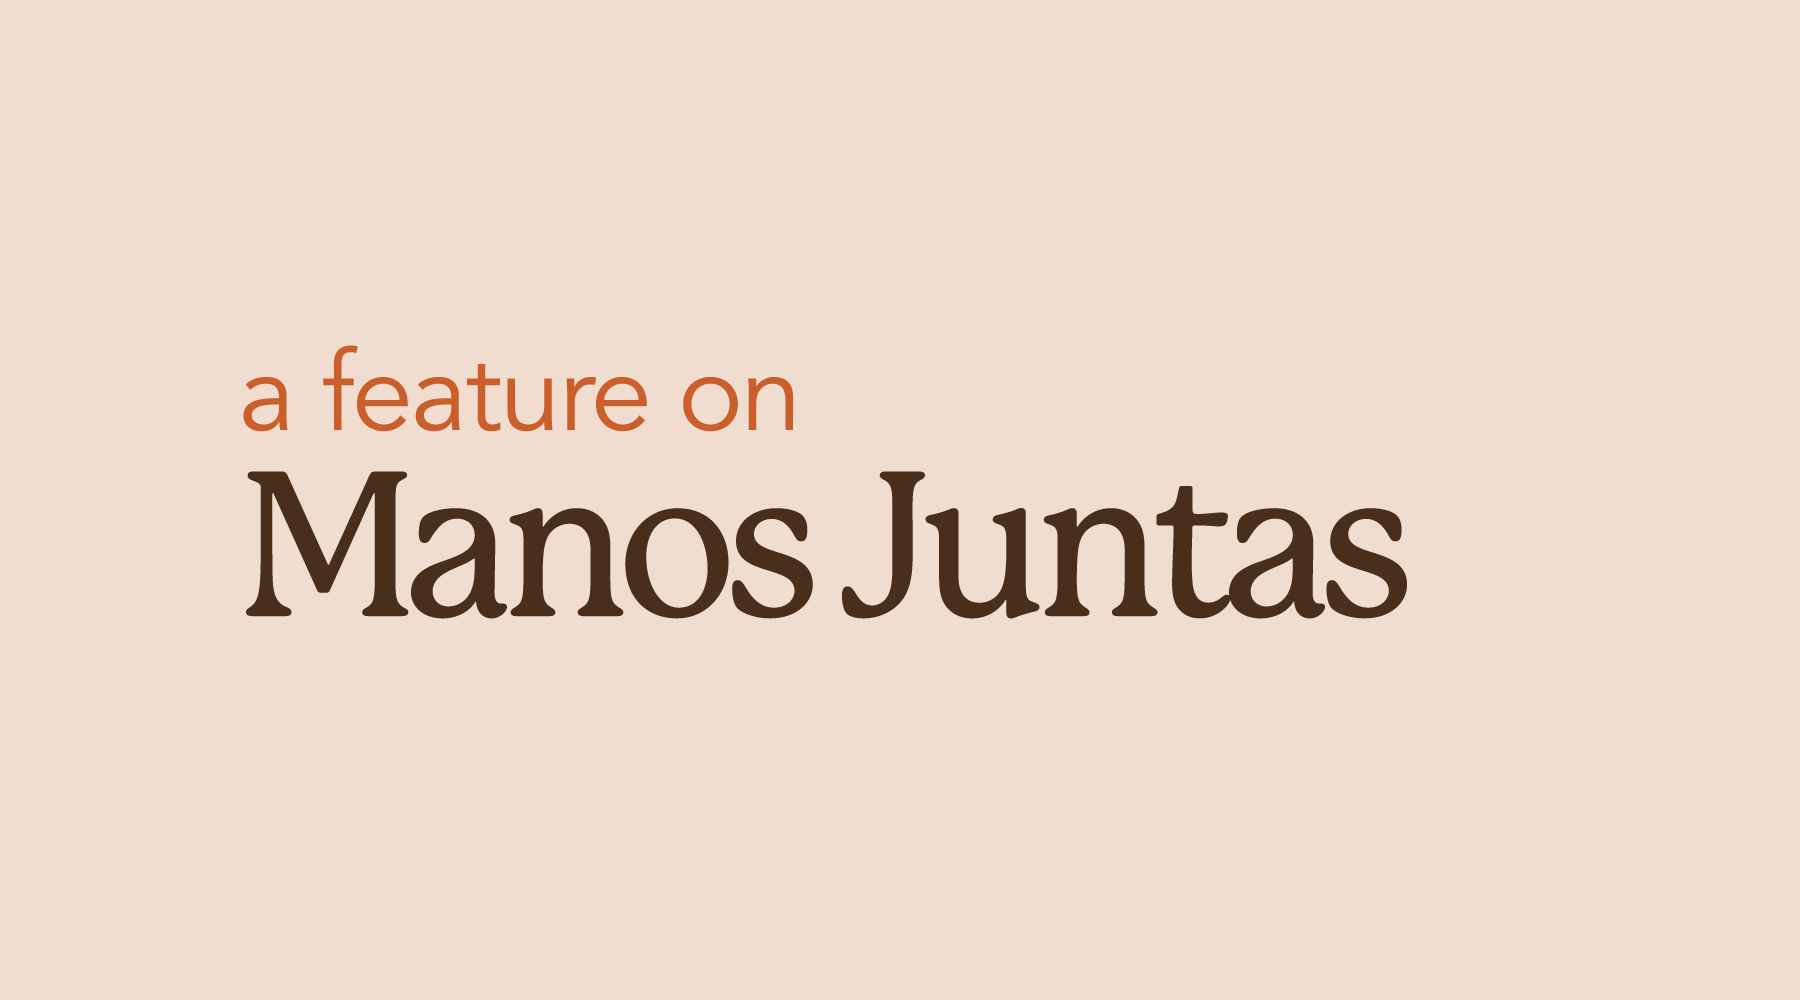 graphic for sagebrush coffee blog saying "a feature on manos juntas"